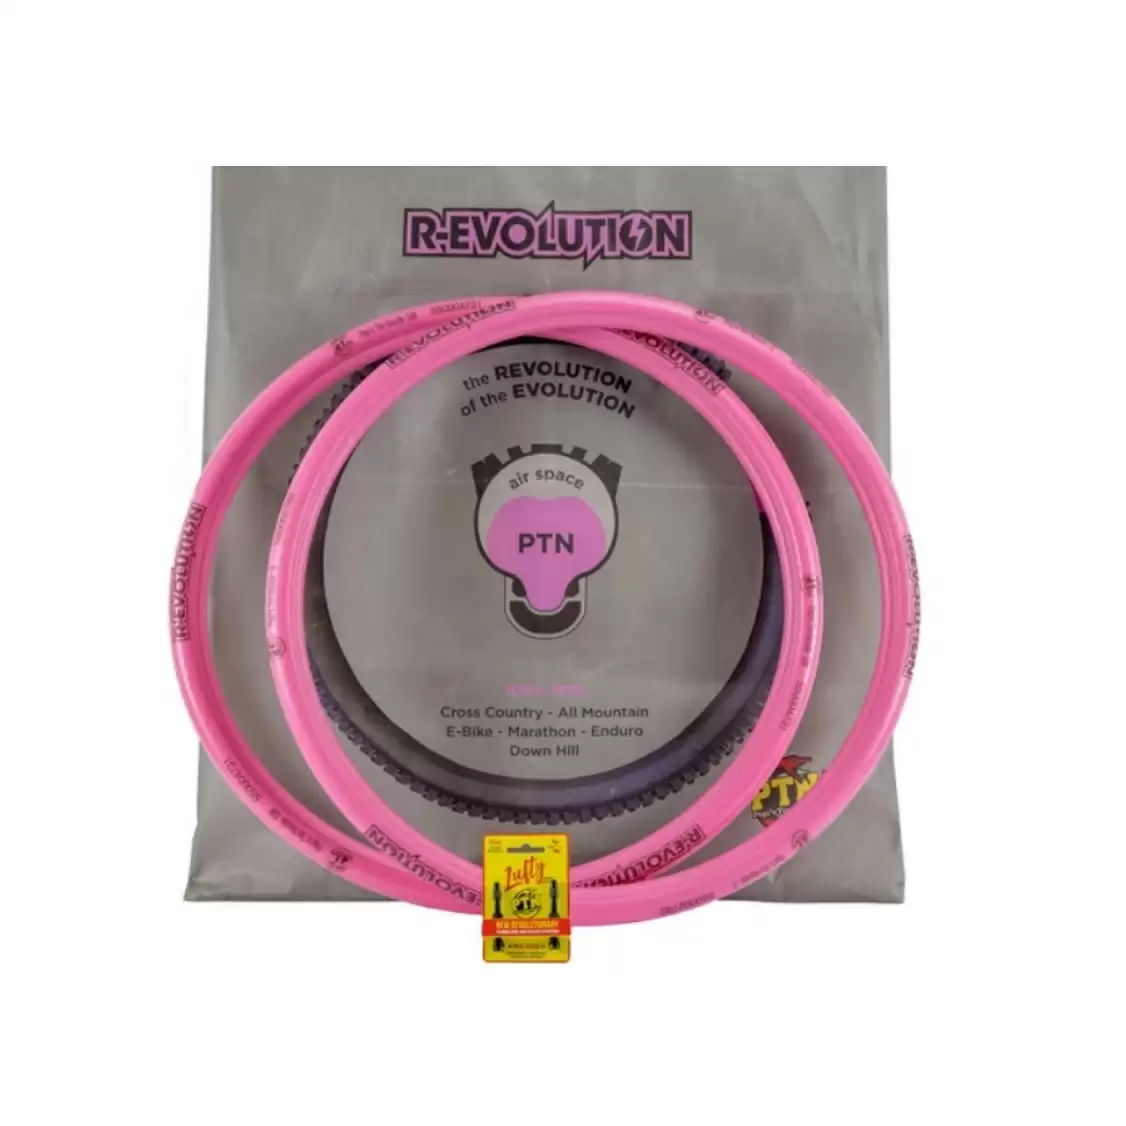 Tubeless kit R-Evolution puncture prevention 29 size M/L pink - image